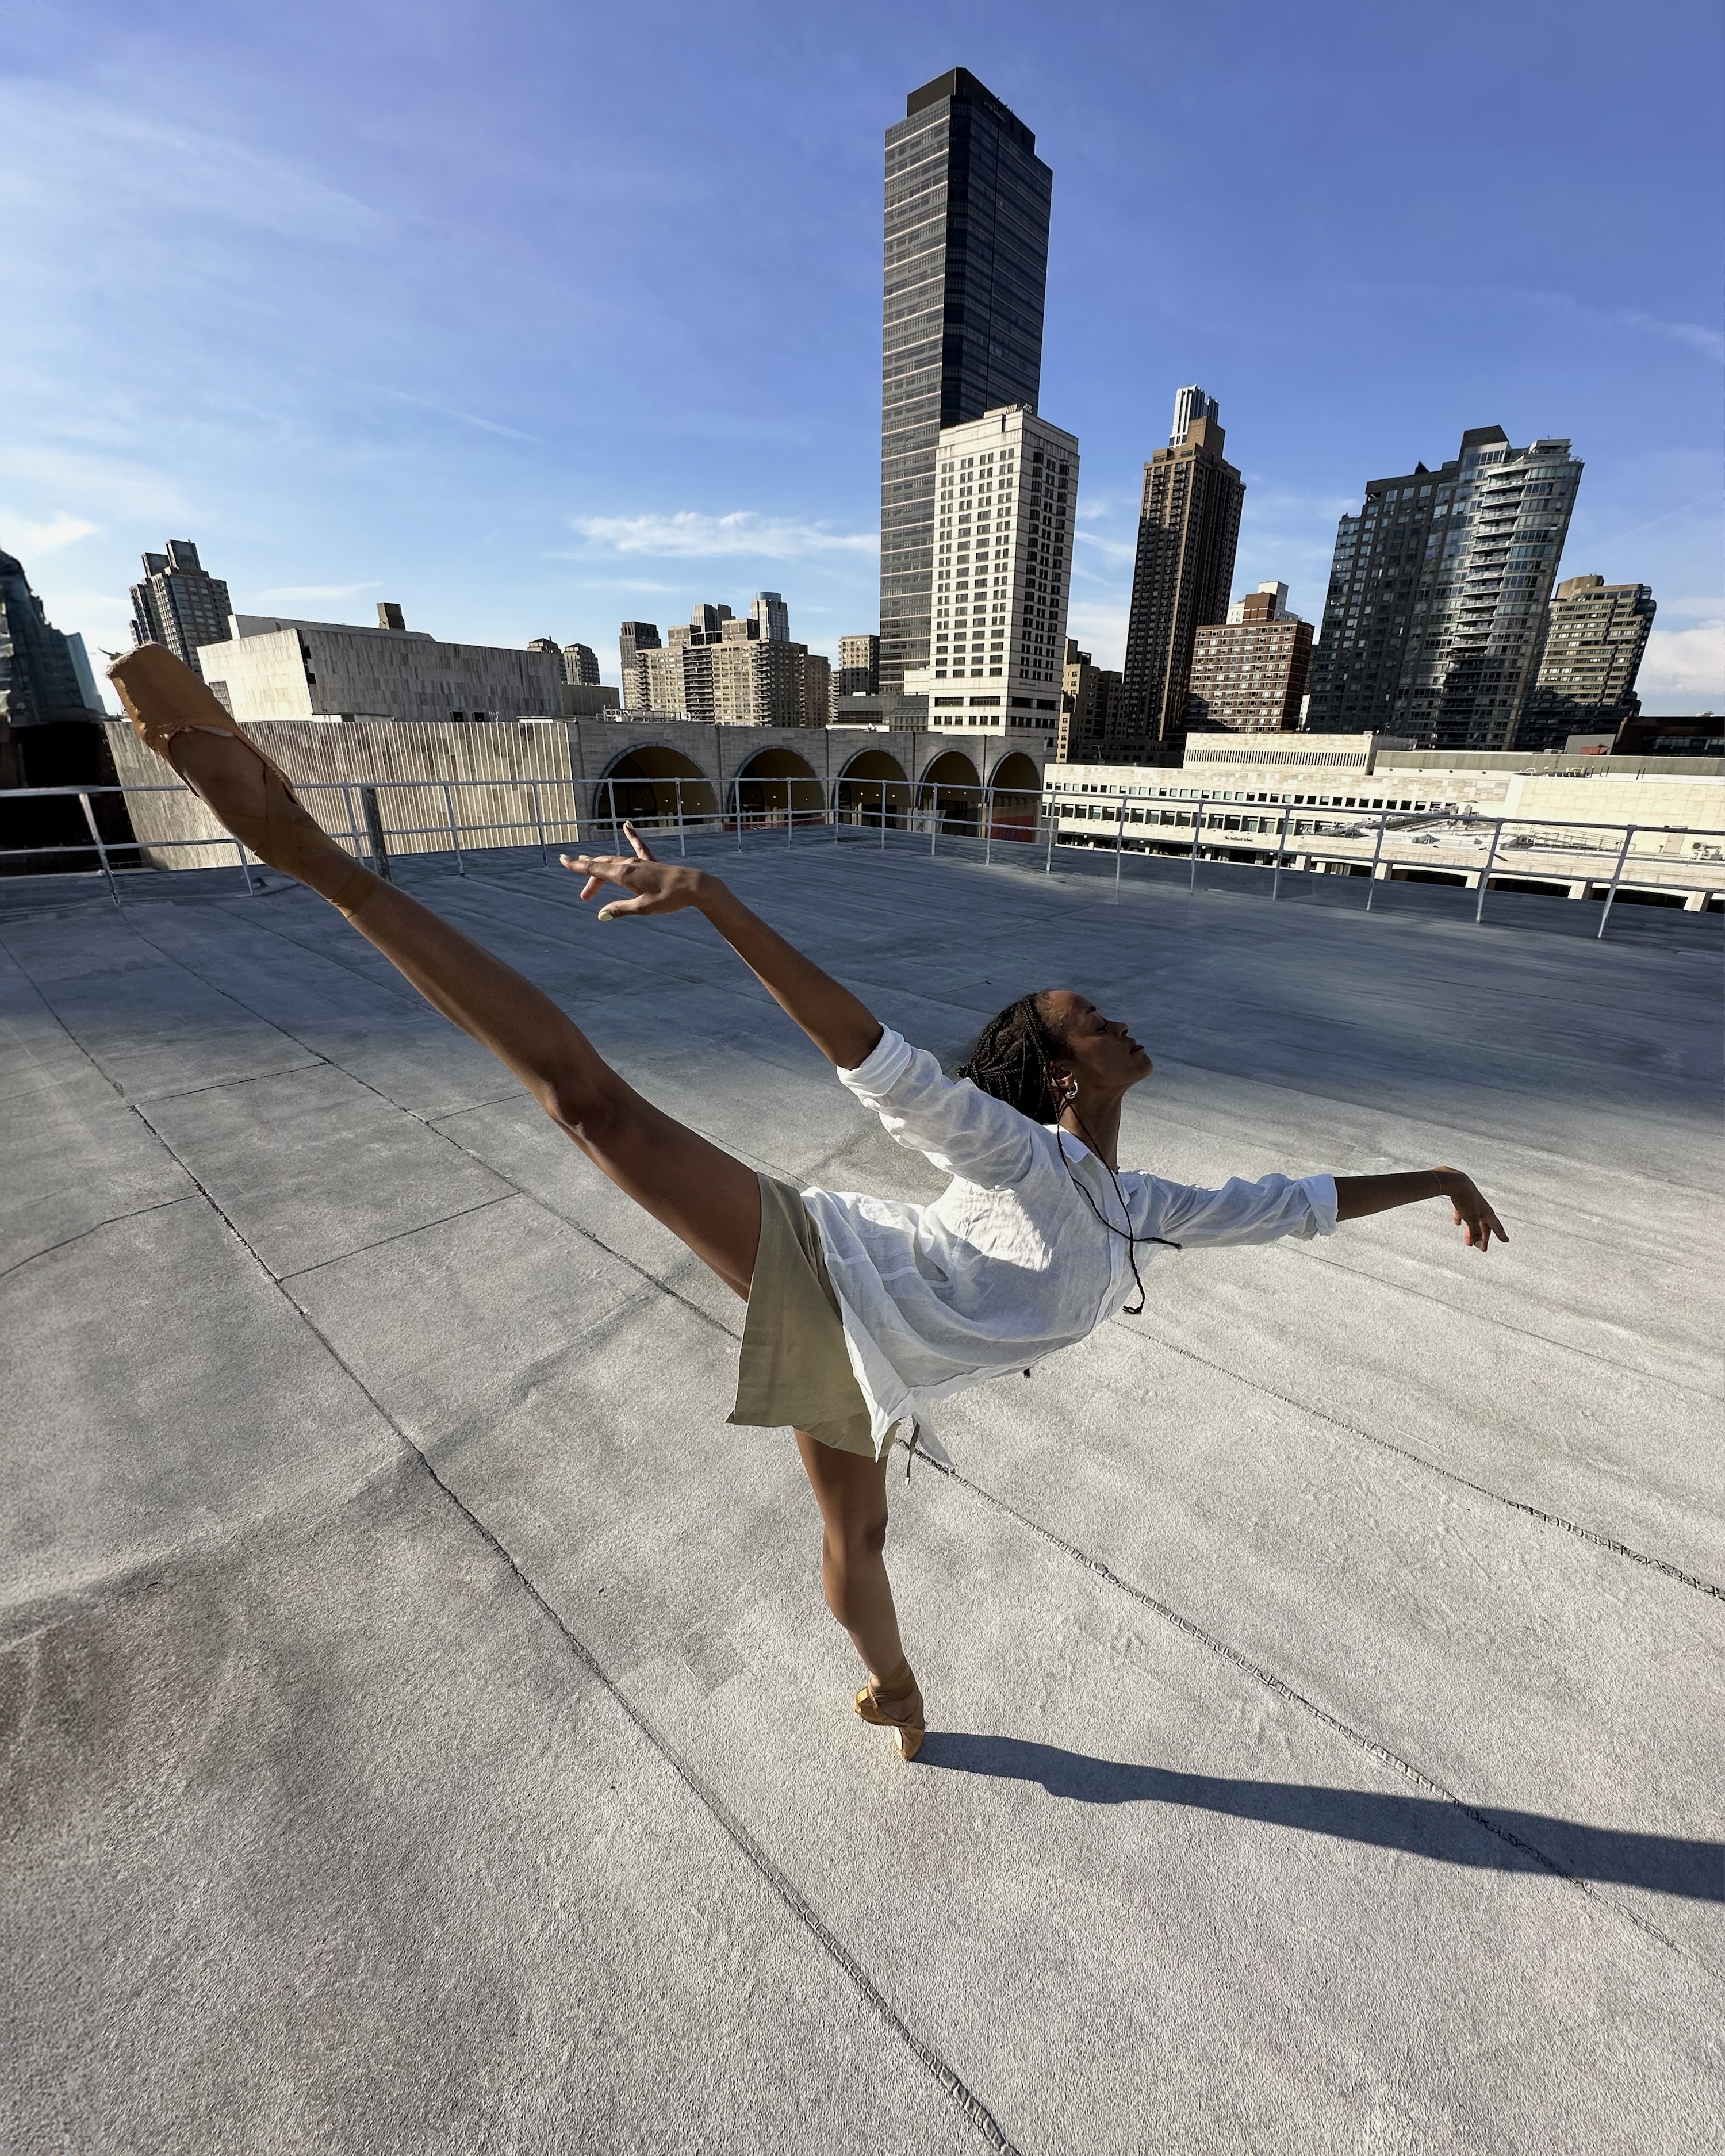 Next generation of dancers bring GAP's linen collection life through movement